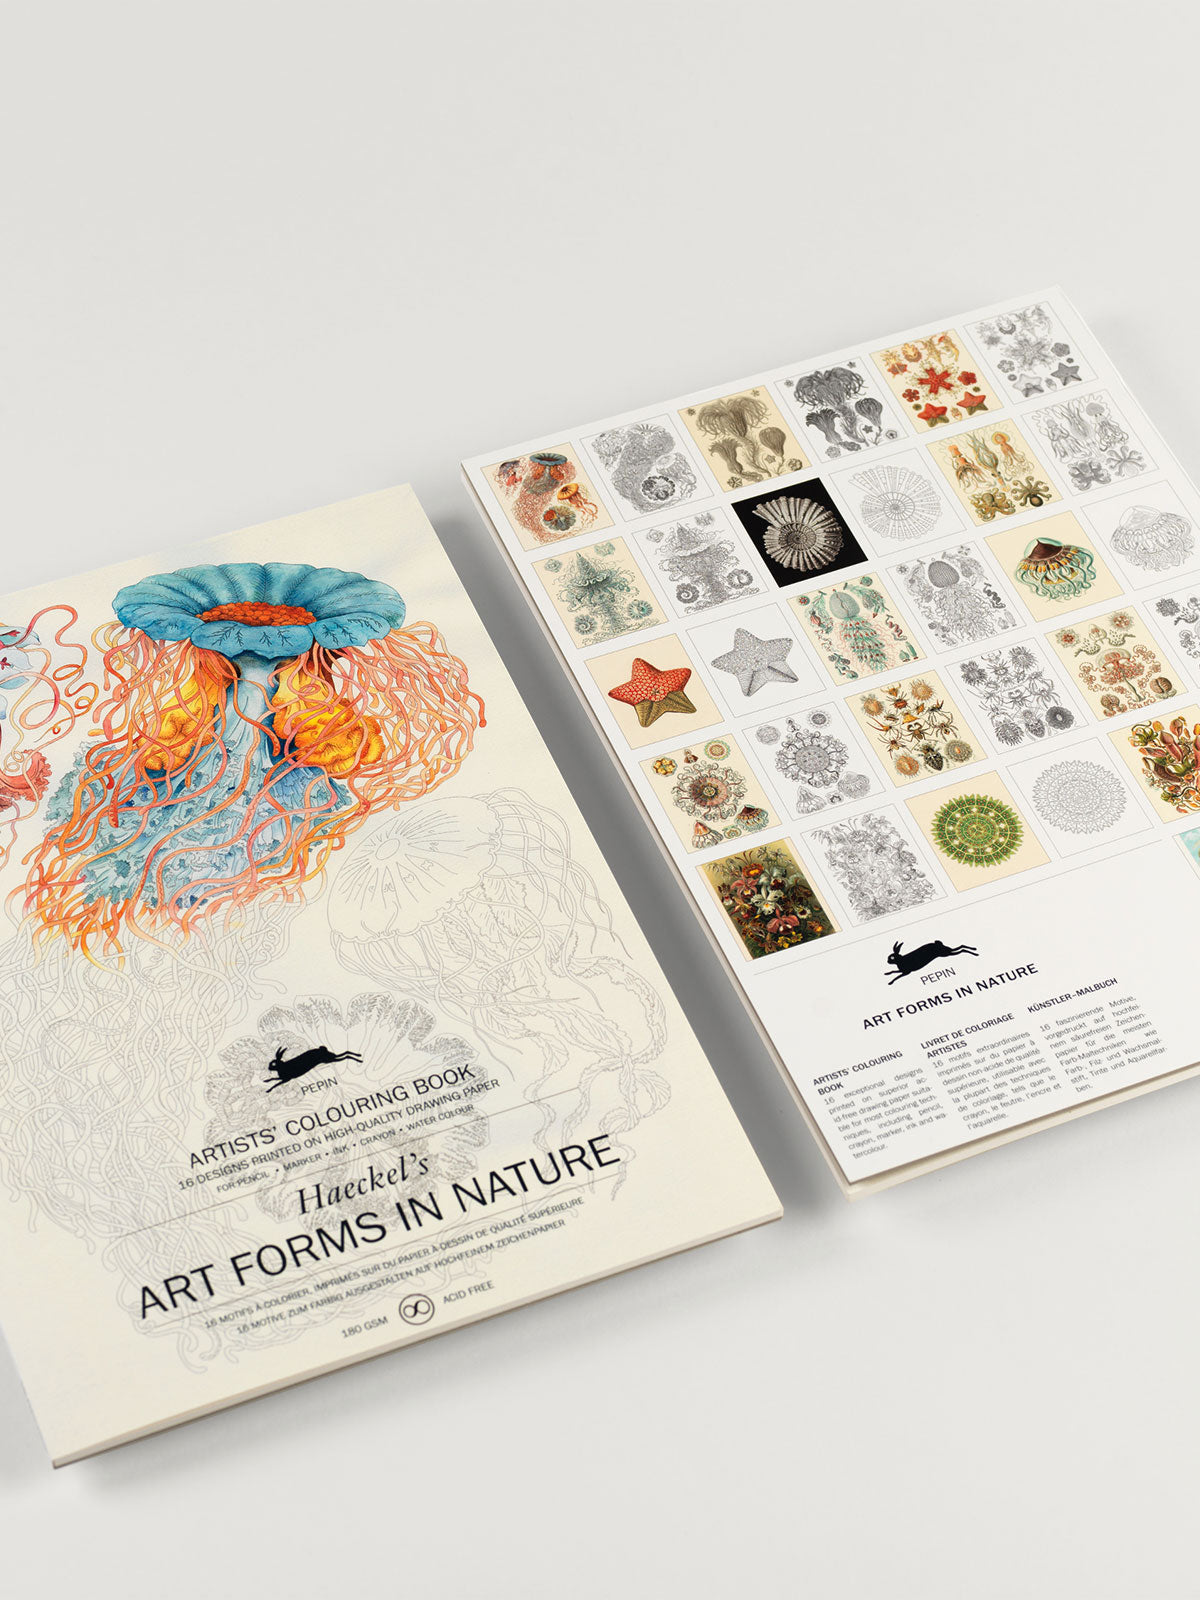 Art Forms in Nature Artist's Colouring Book